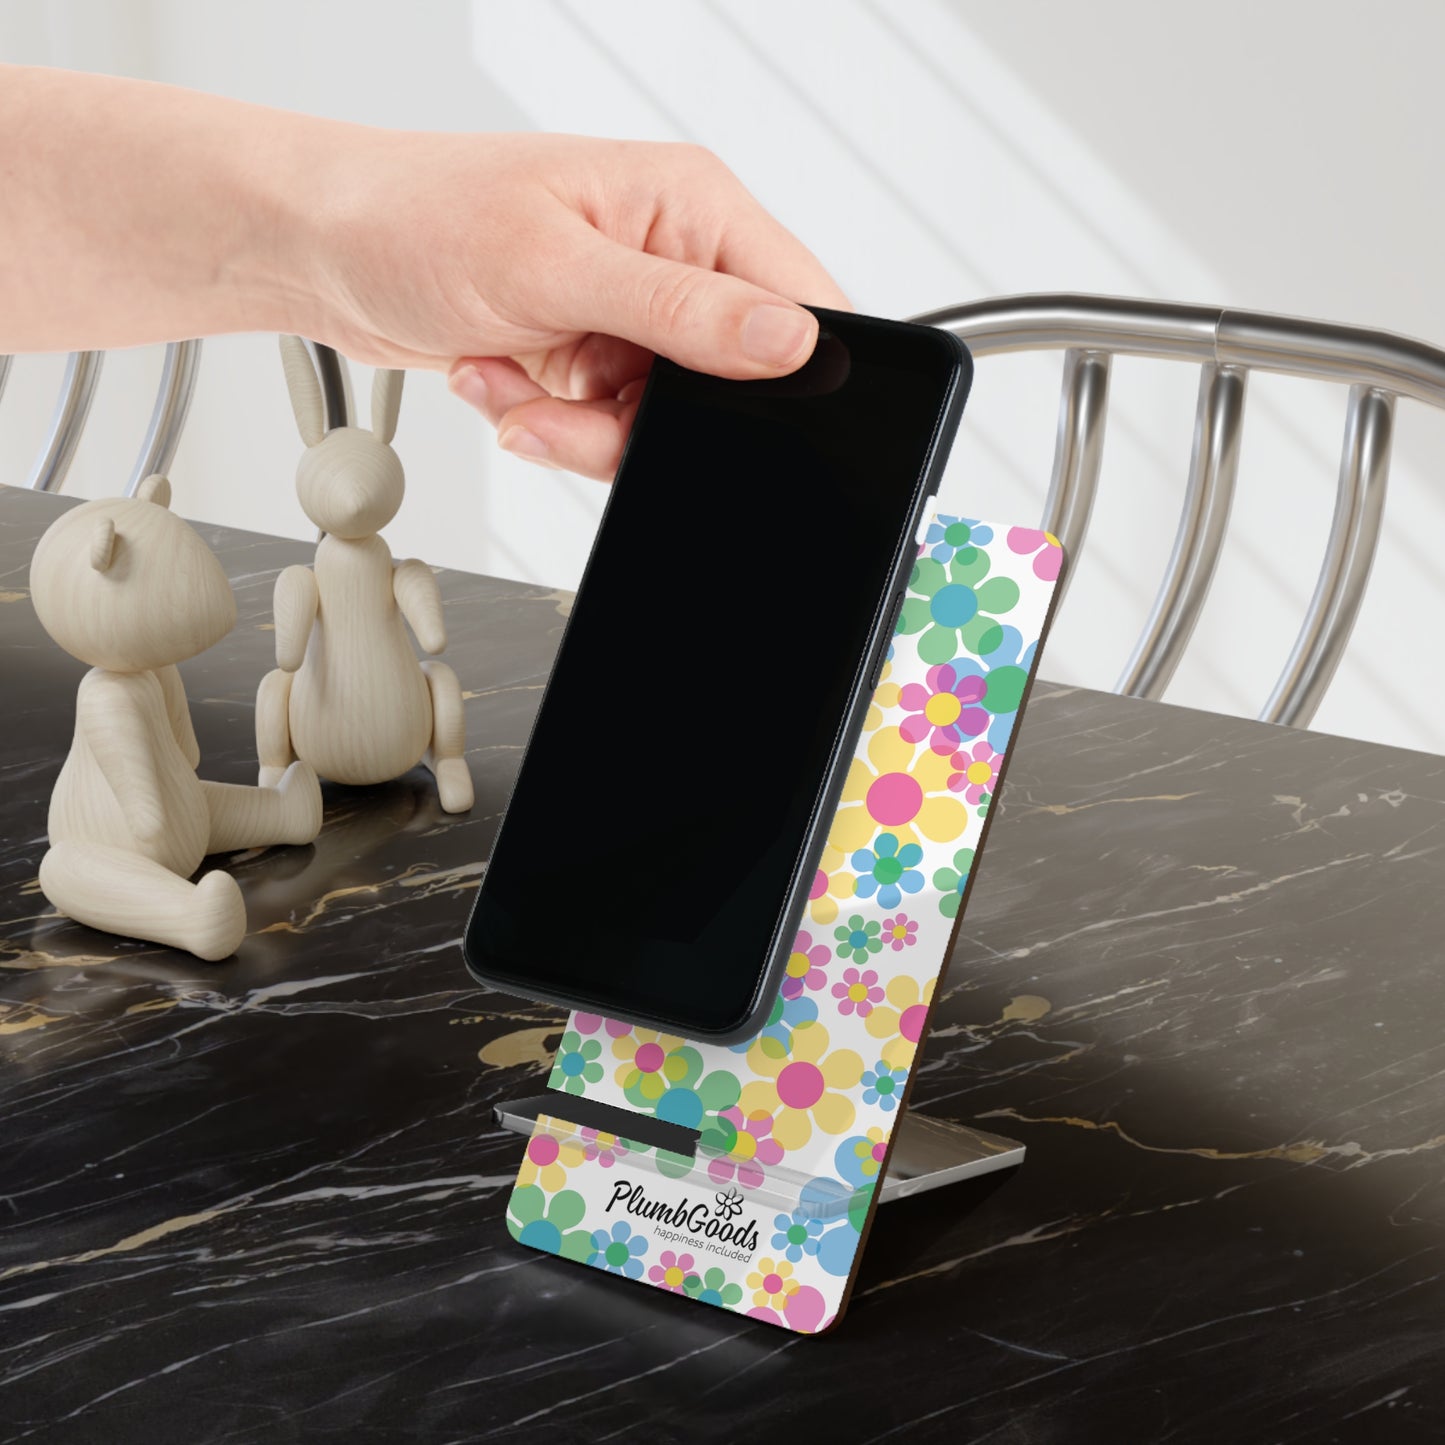 Smartphone Display Stand Floating Daisies